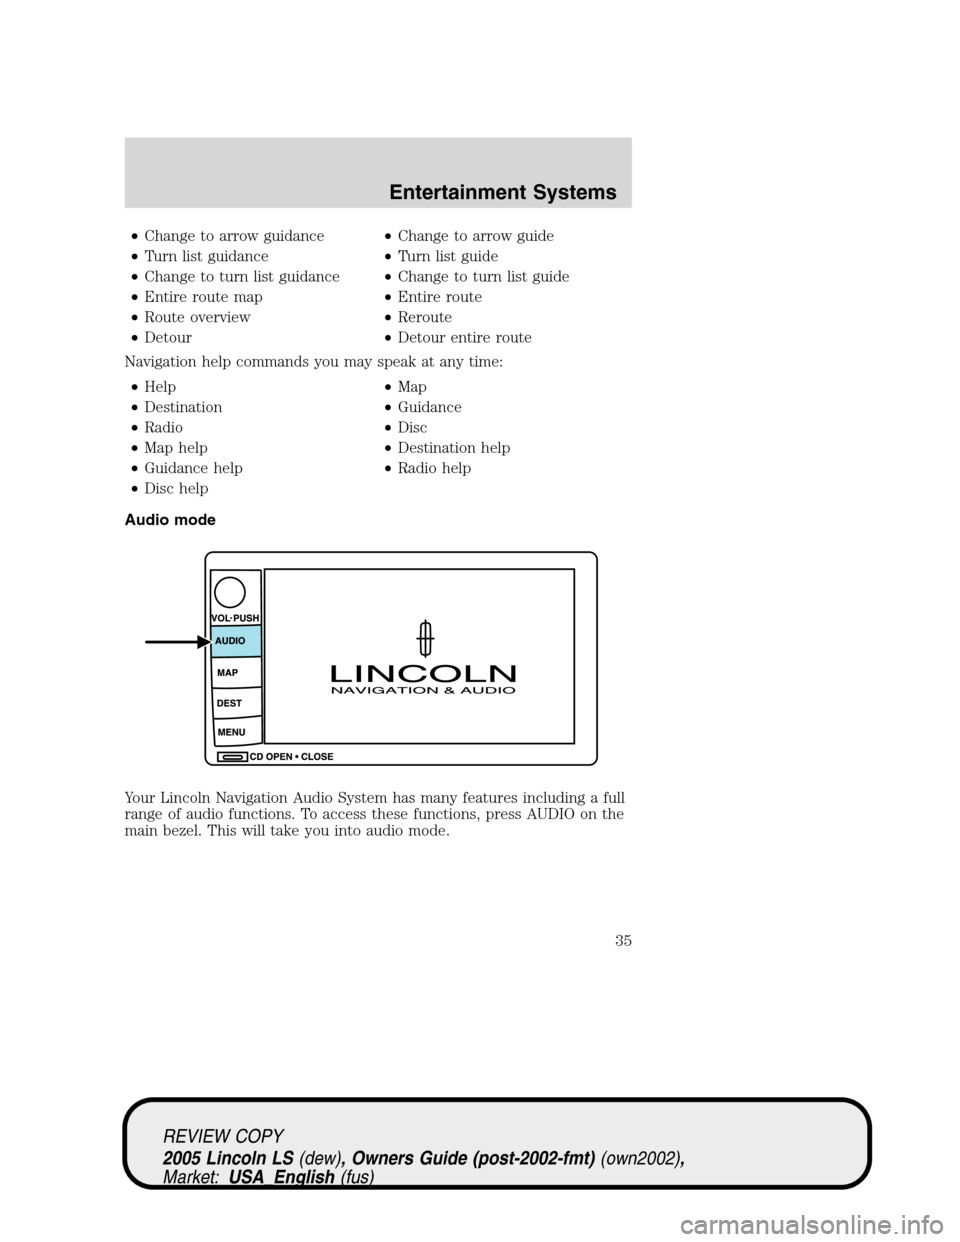 LINCOLN LS 2005 User Guide •Change to arrow guidance•Change to arrow guide
•Turn list guidance•Turn list guide
•Change to turn list guidance•Change to turn list guide
•Entire route map•Entire route
•Route over